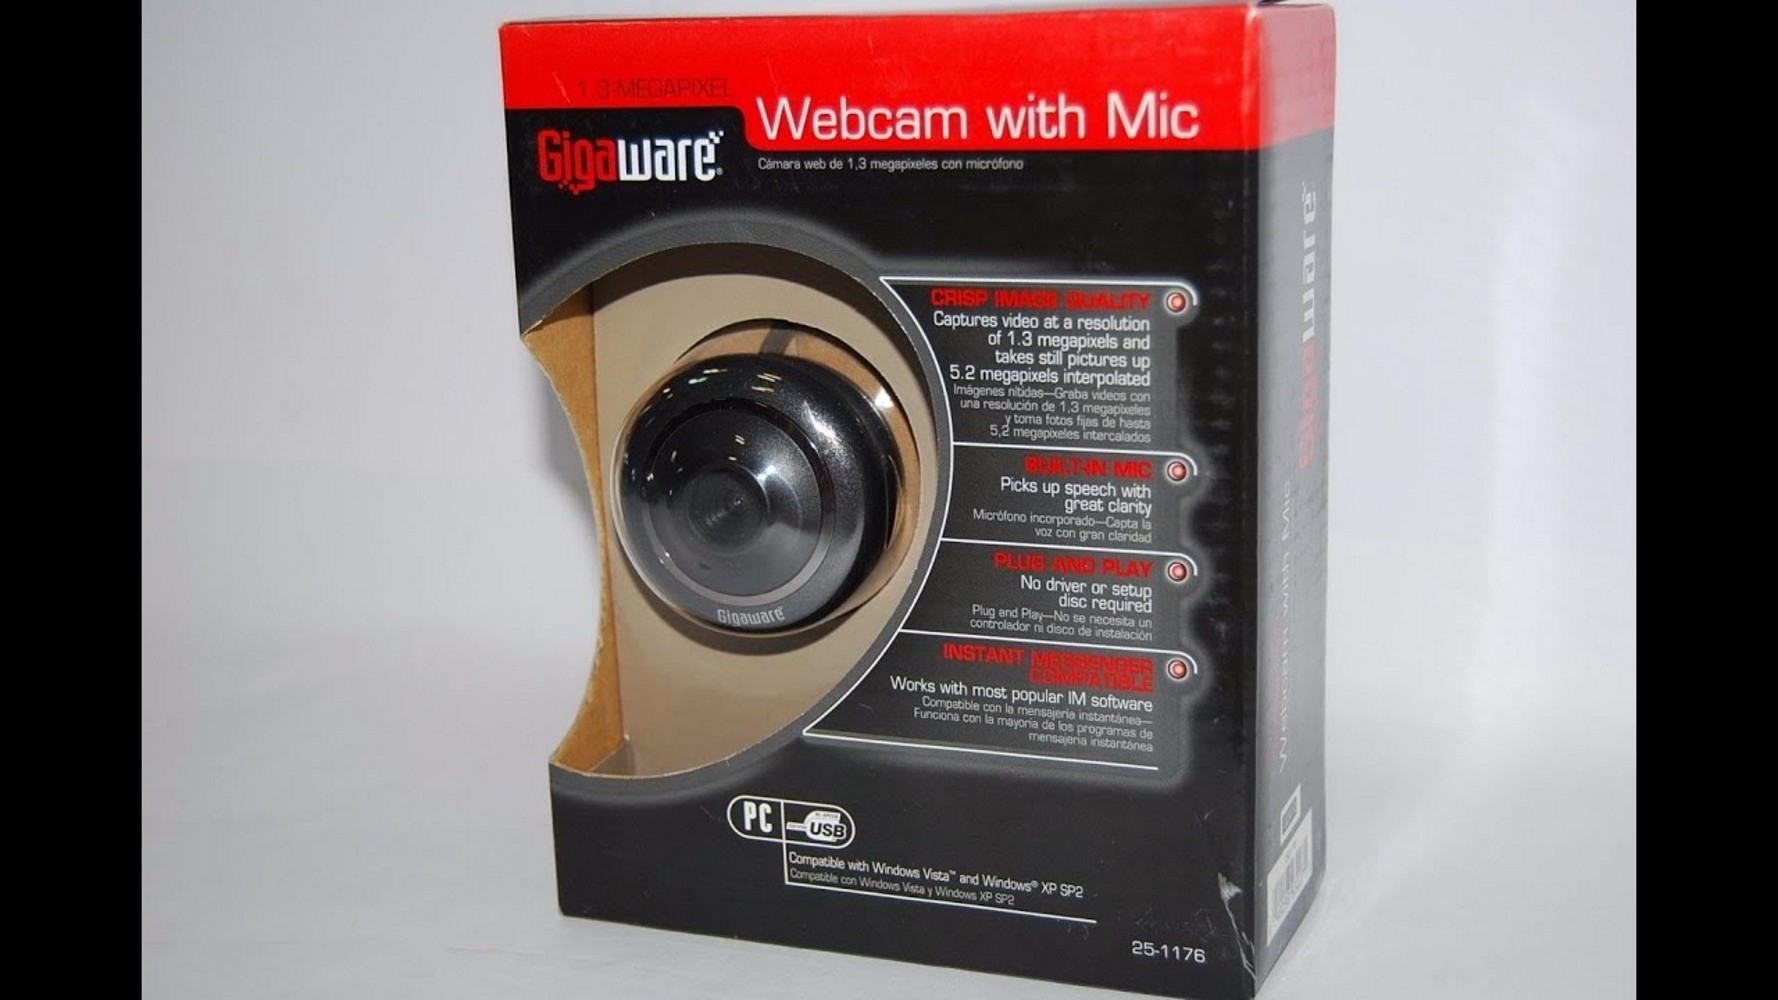 Gigaware 25-1176 1.3MP Webcam with Microphone